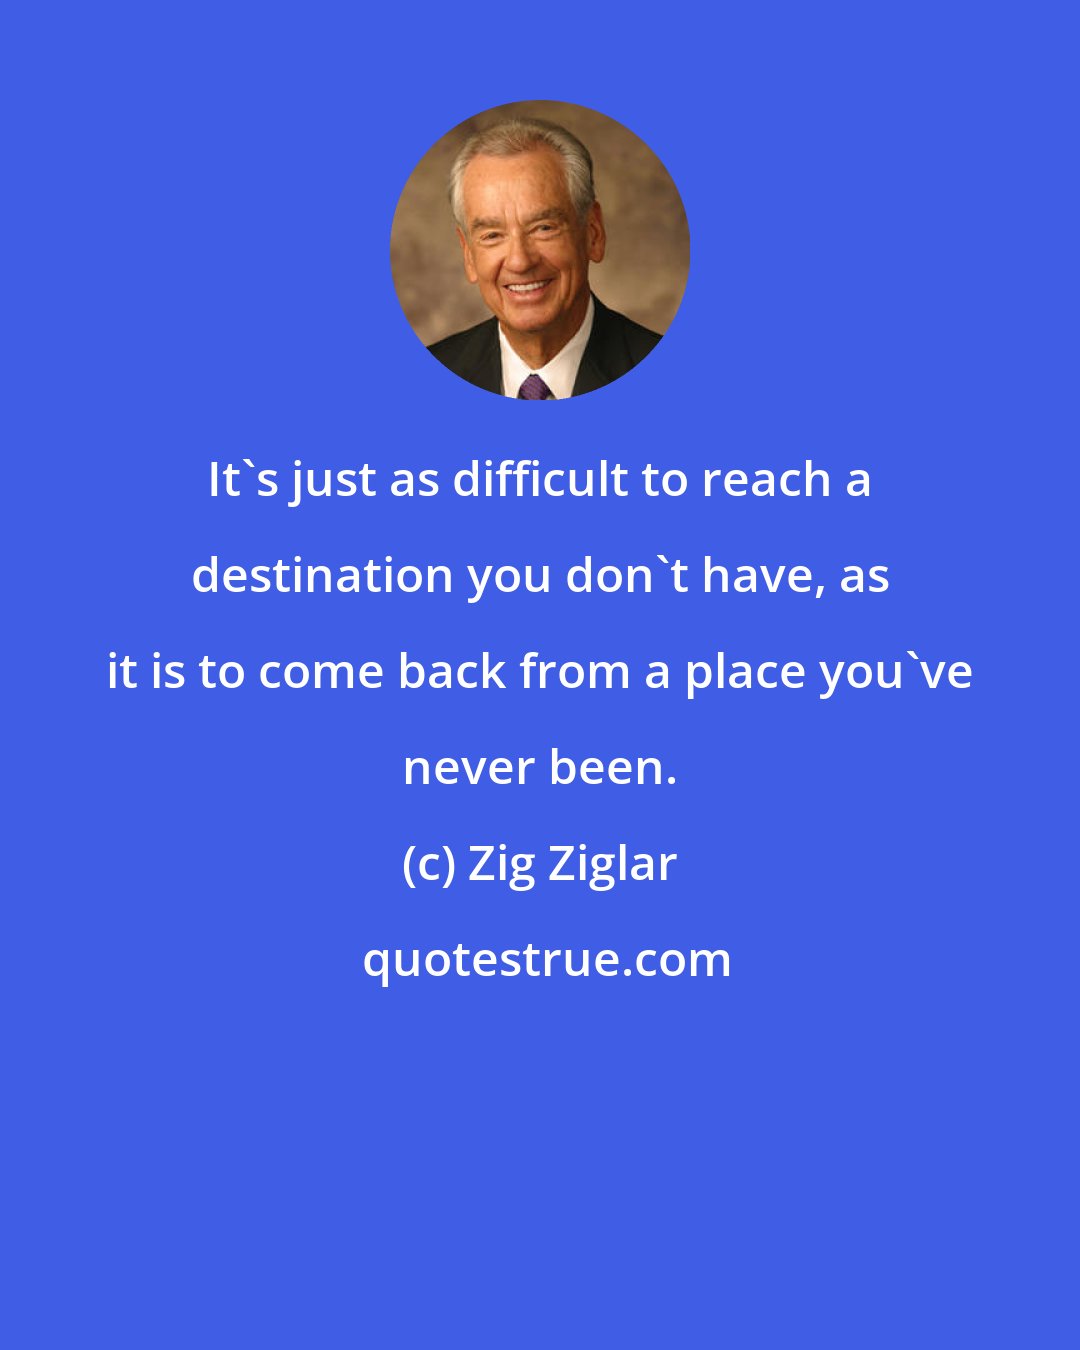 Zig Ziglar: It's just as difficult to reach a destination you don't have, as it is to come back from a place you've never been.